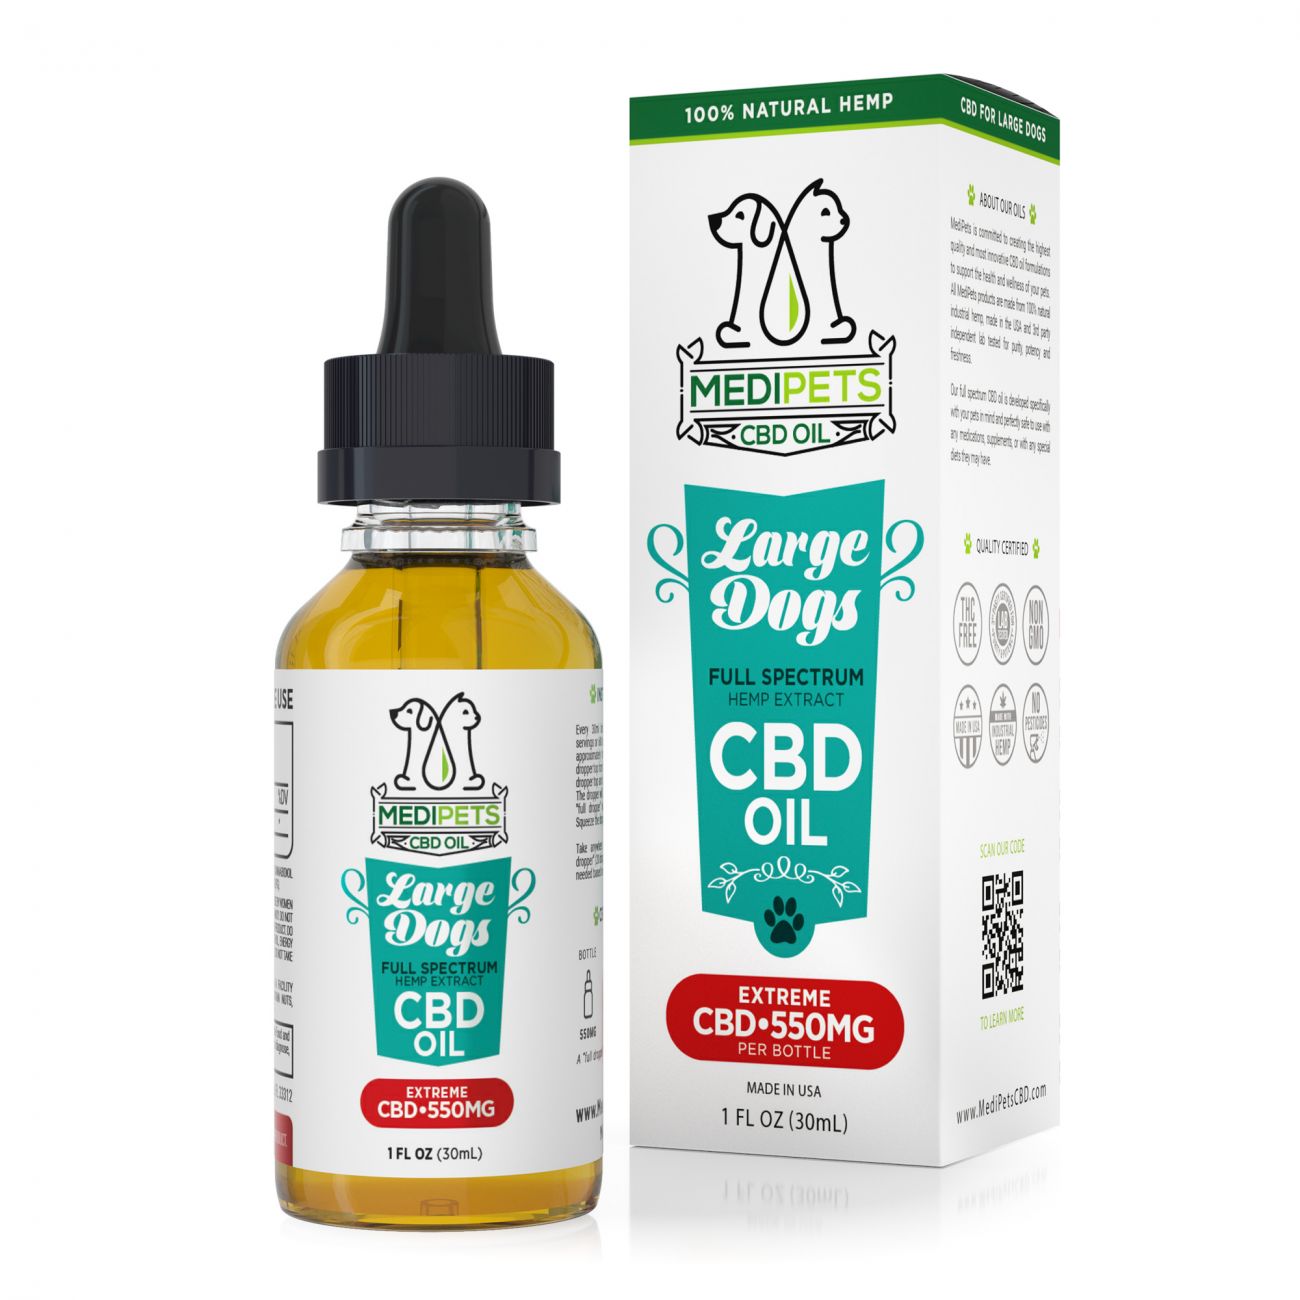 7 Crucial Signs to Find the Best Quality CBD Oil Brand for Dogs